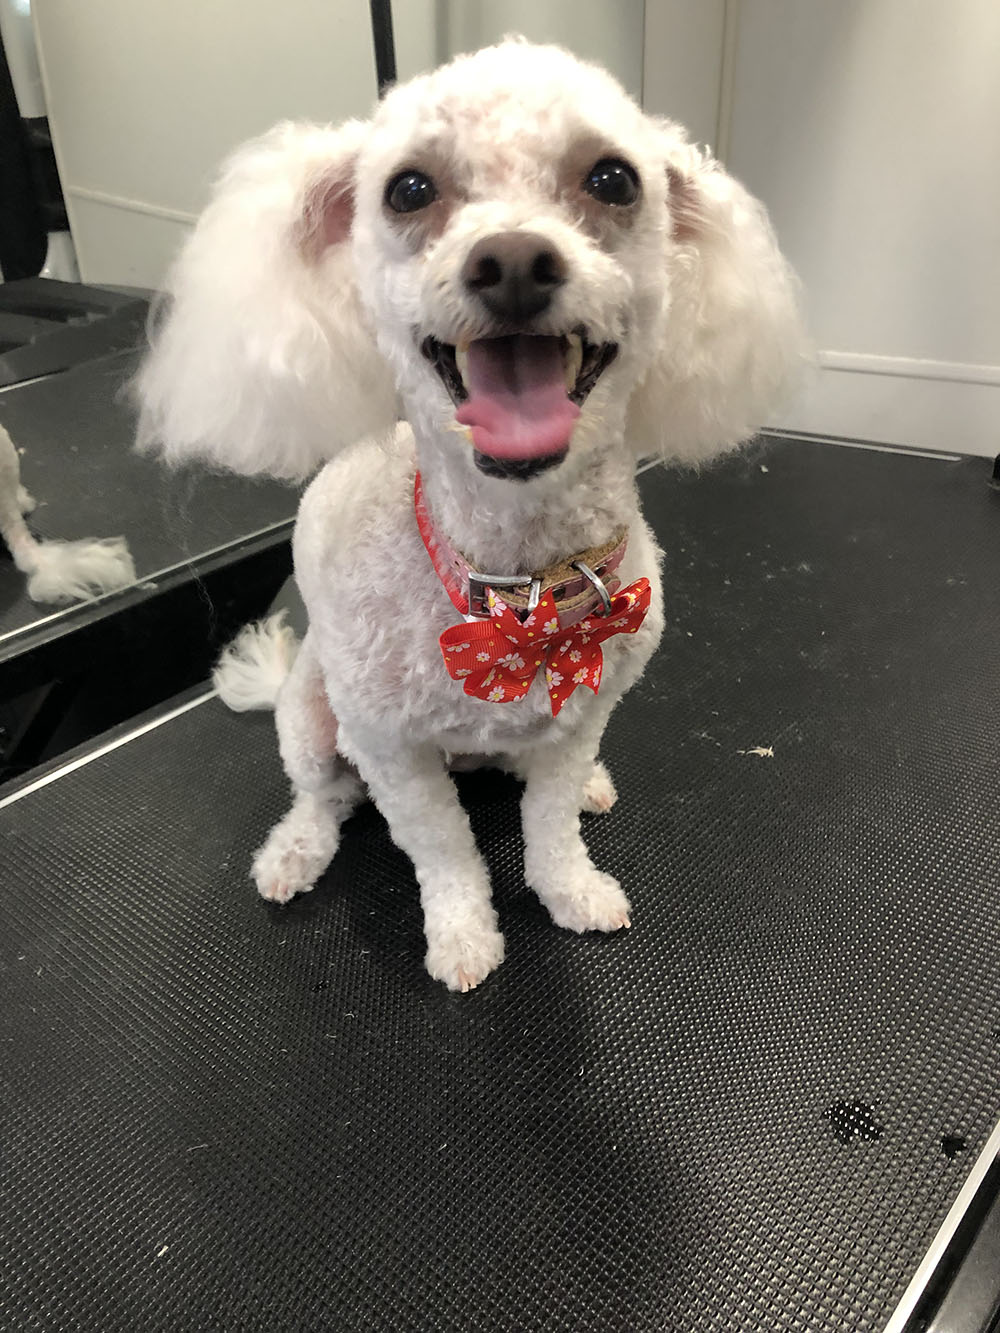 A Dog After Grooming With a Red Color Bow